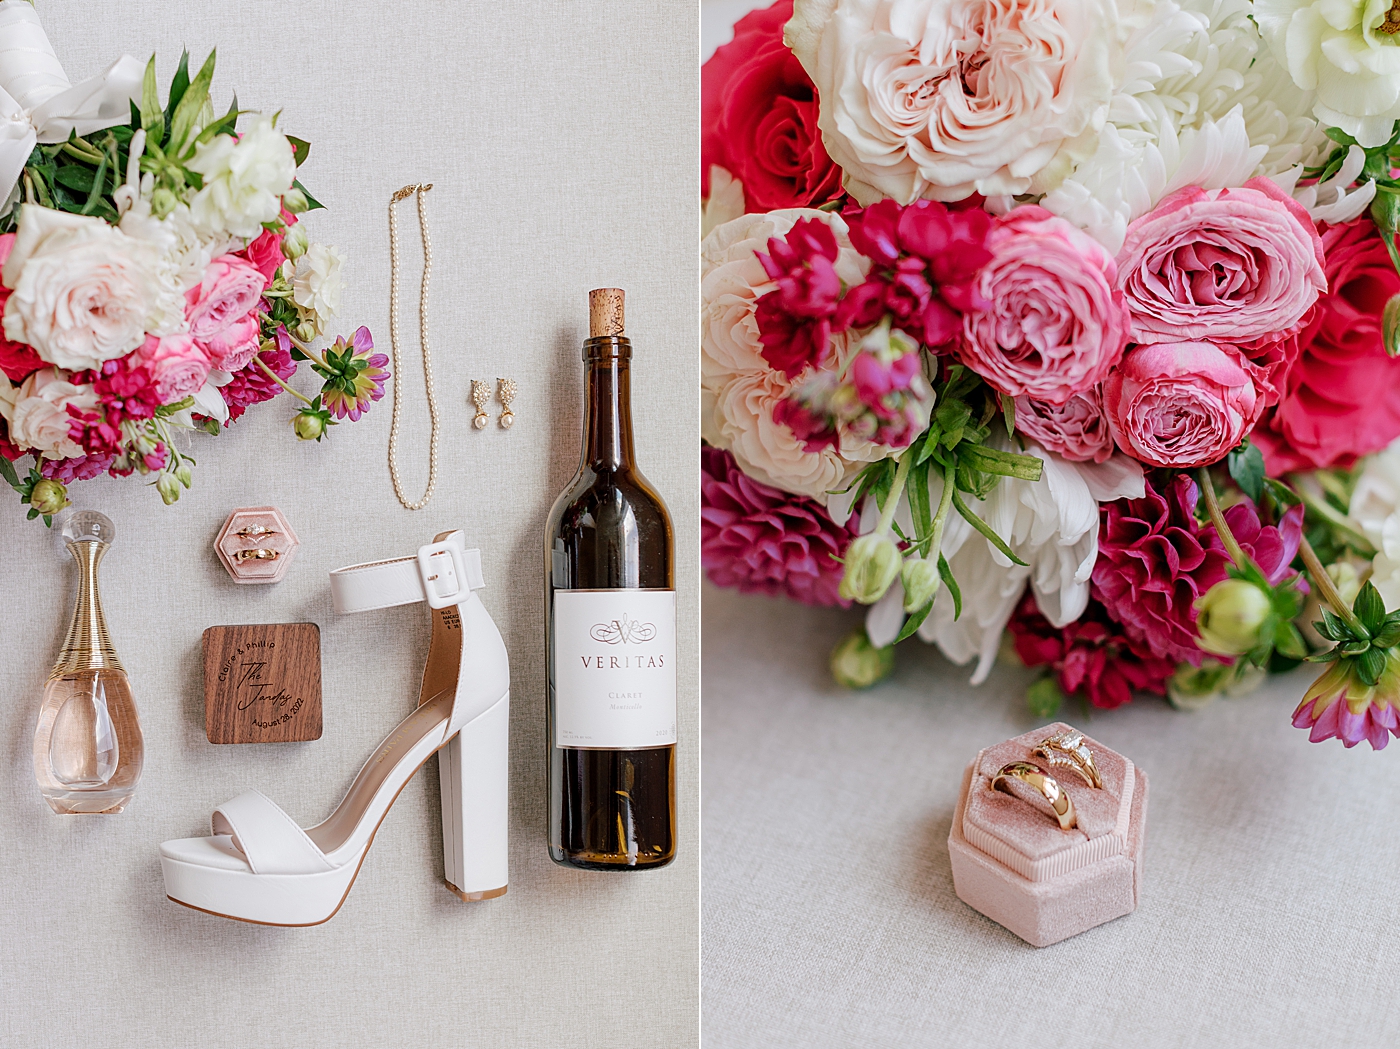 Side-by-side image of wedding detail flat lay and a ring box with rings next to a colorful wedding bouquet | Image by Hope Helmuth Photography